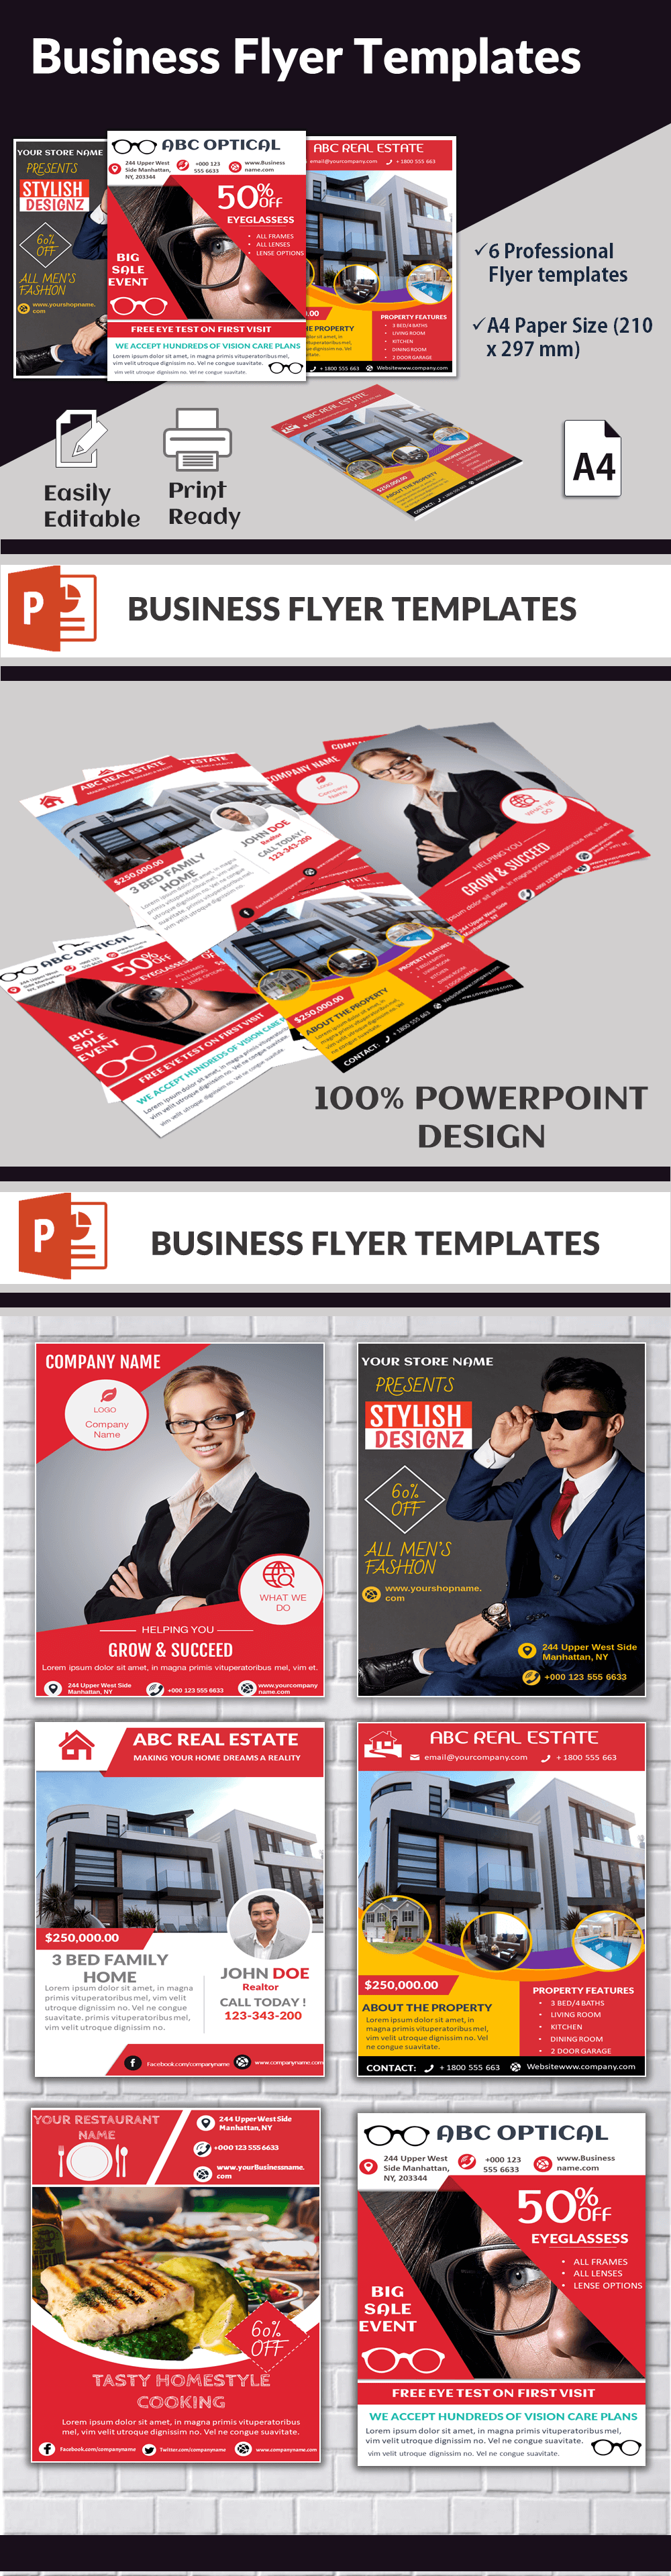 Business flyer templates